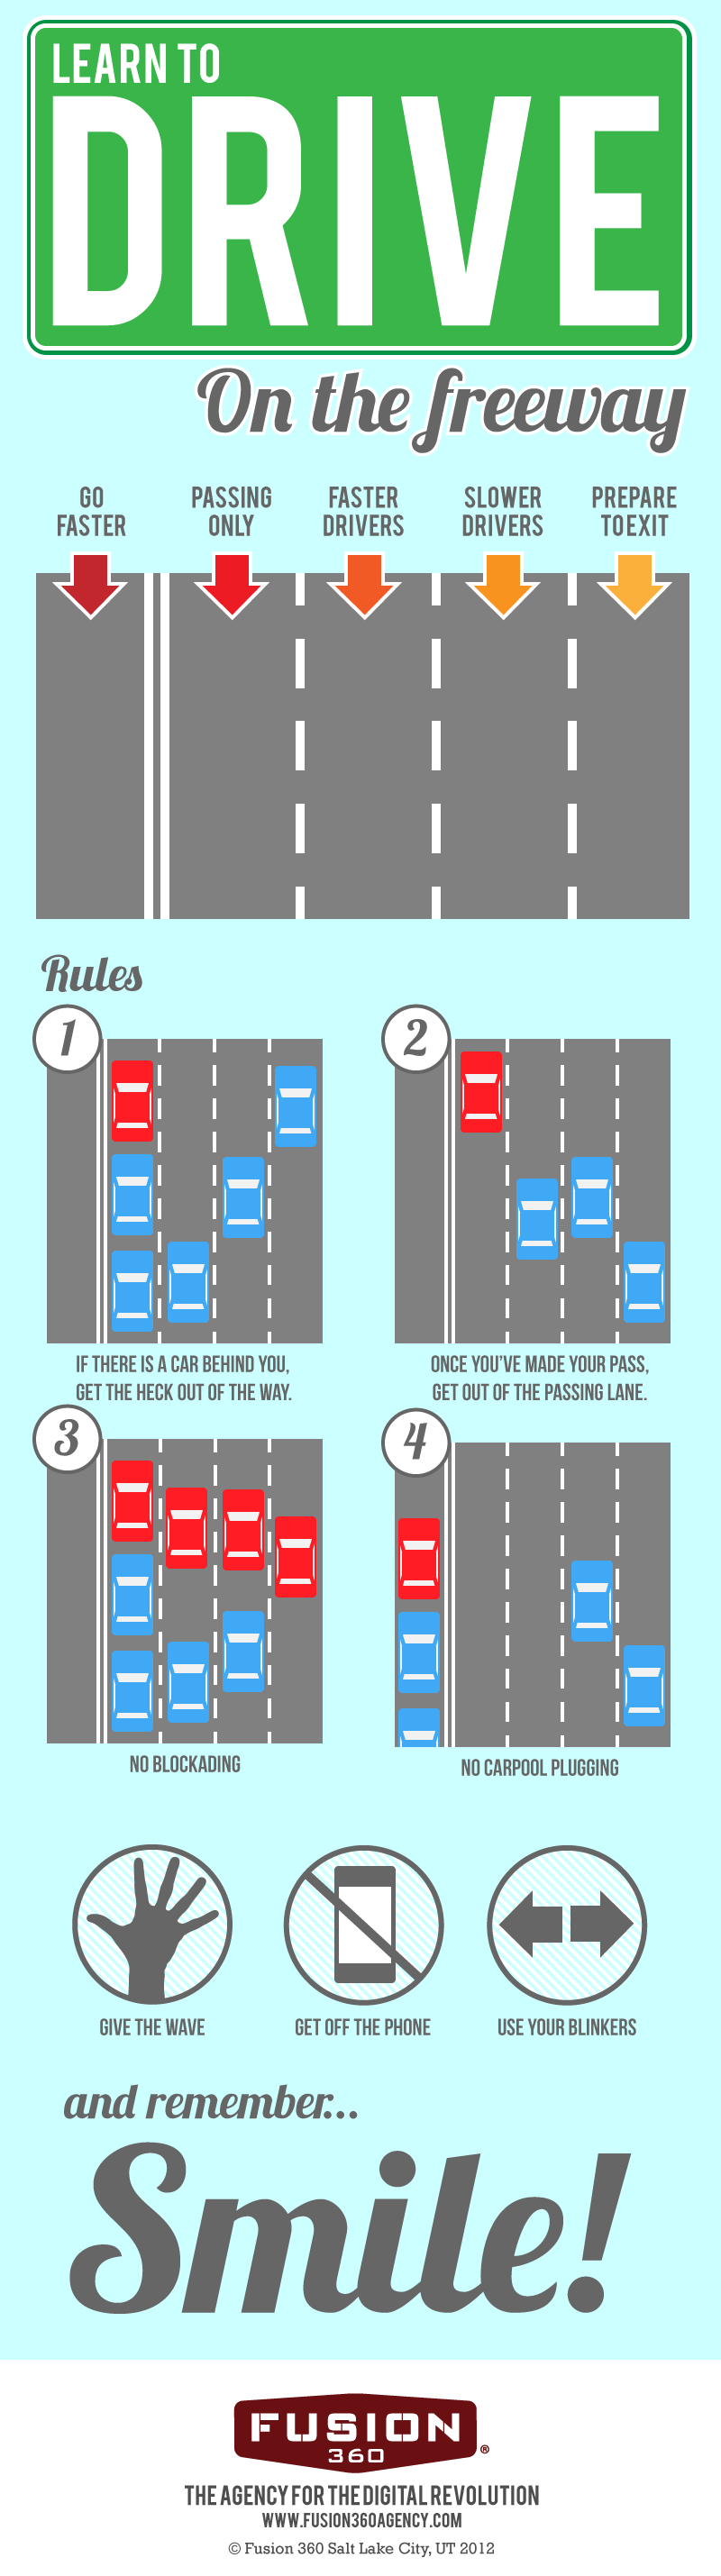 Learn to Drive on the Freeway Infographic